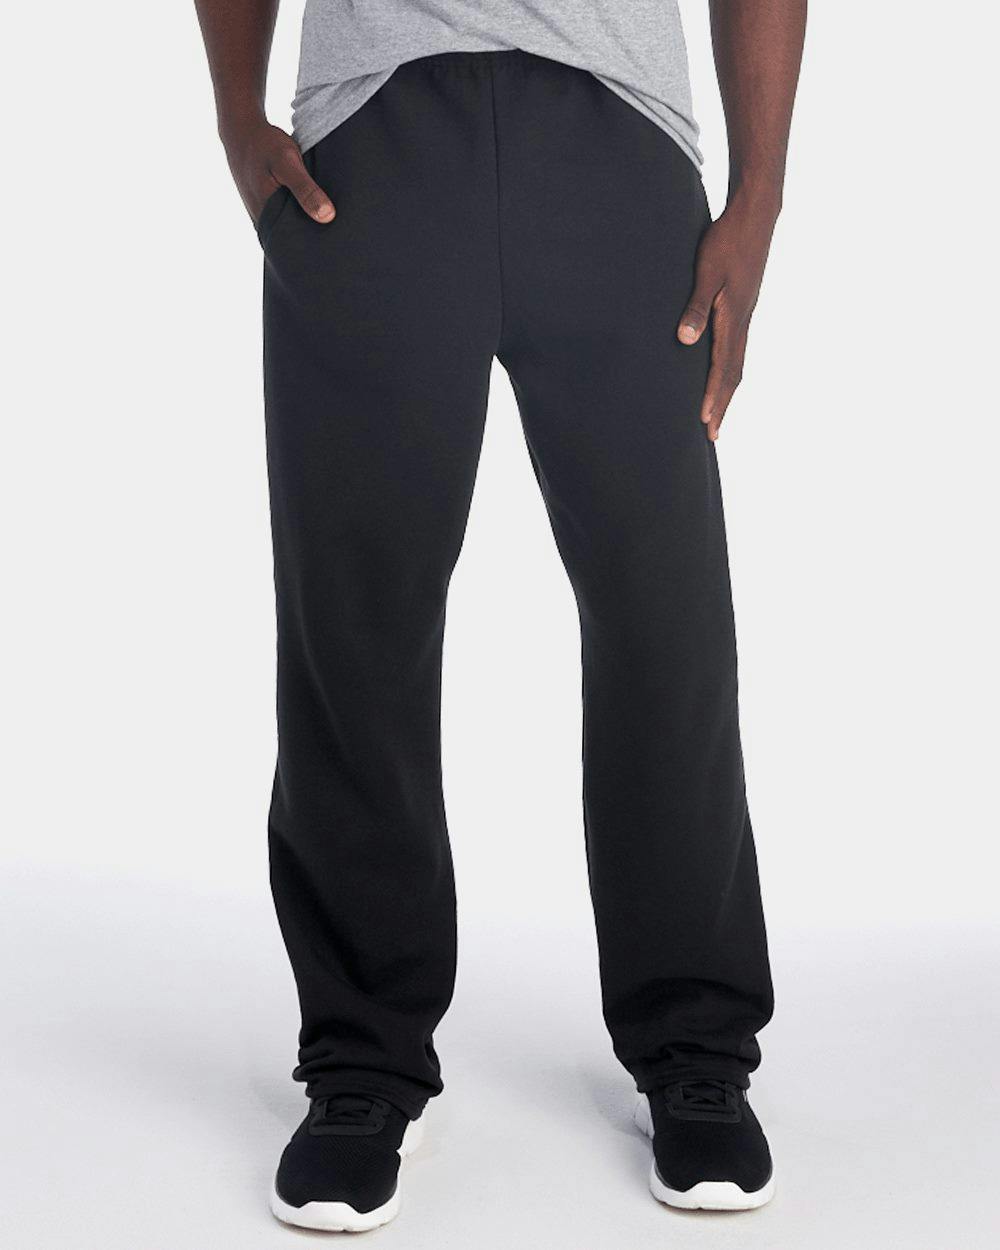 Image for NuBlend® Open-Bottom Sweatpants with Pockets - 974MPR